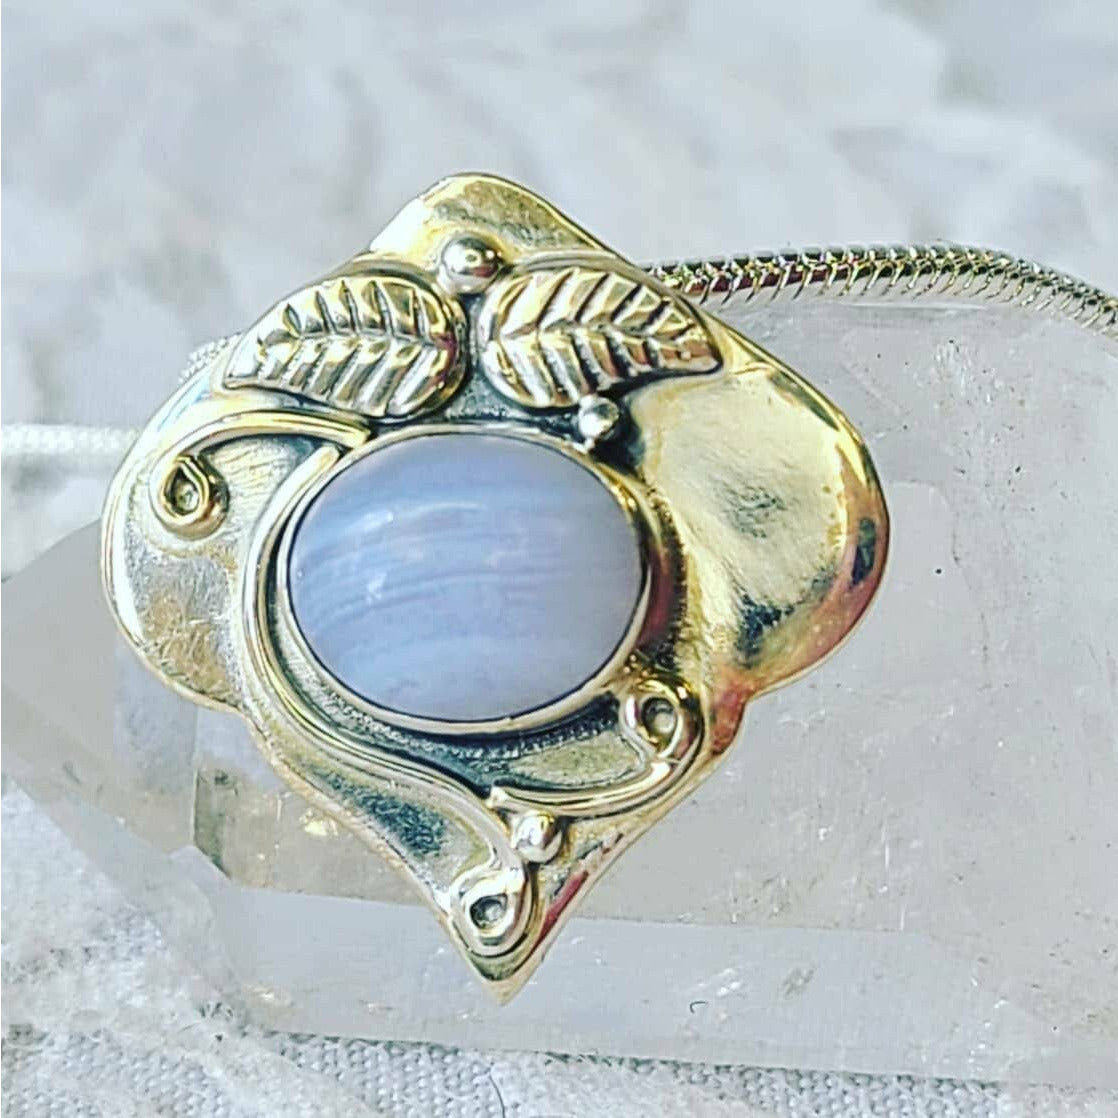 Artisan Made Blue Lace Agate Sterling Silver Pendant Necklace OOAK  Marked 925 ~ Crystal Healing Energy ~ Made in India